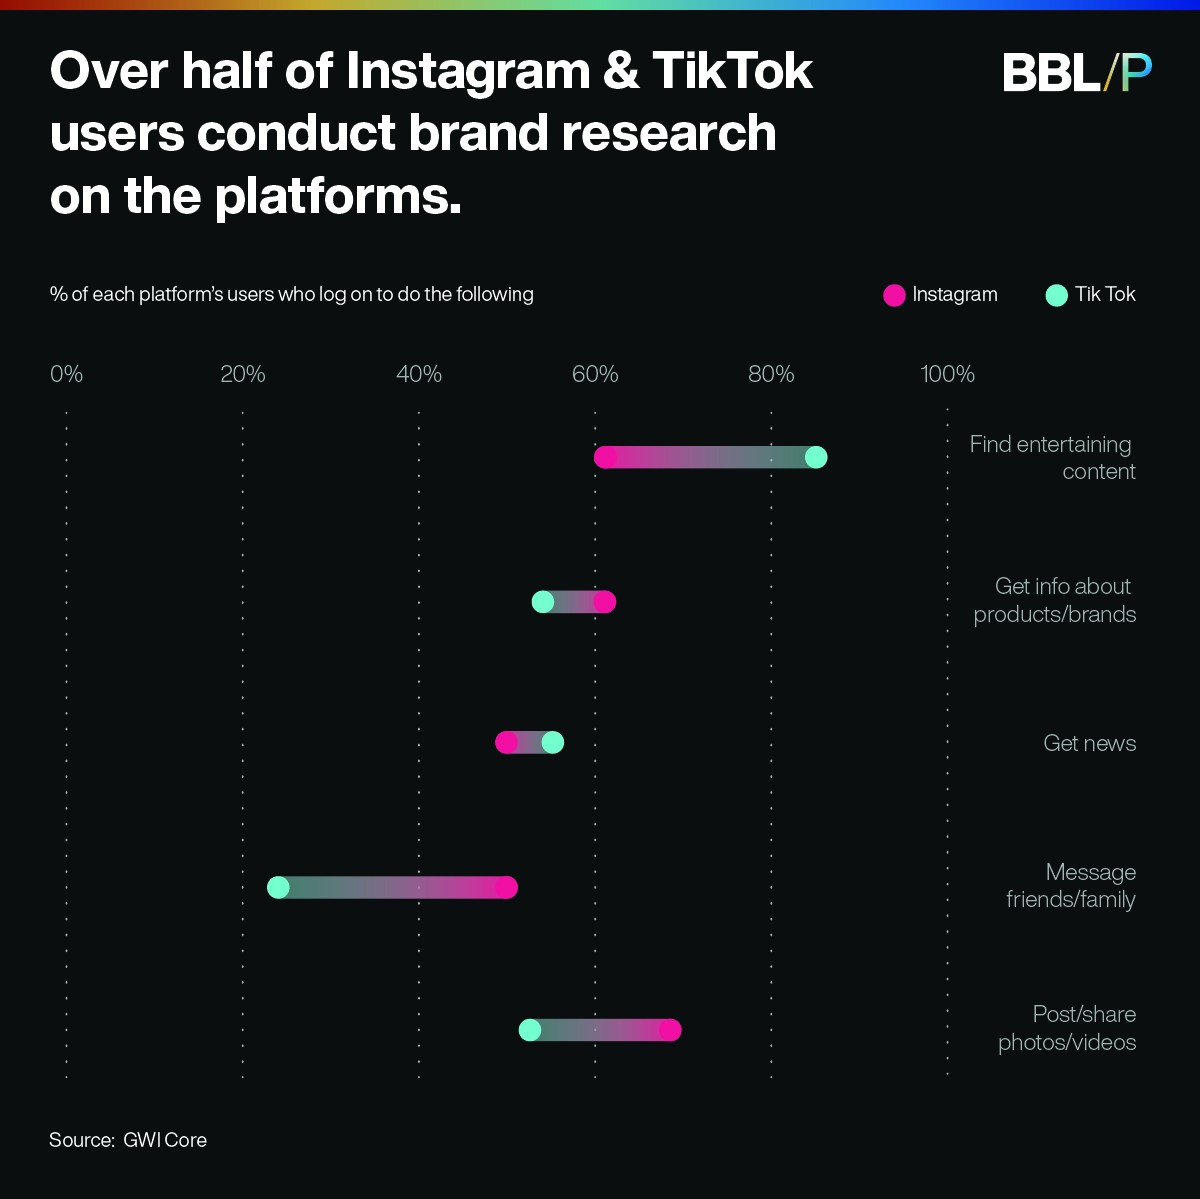 The Reasons Why Users Log on to Instagram vs TikTok